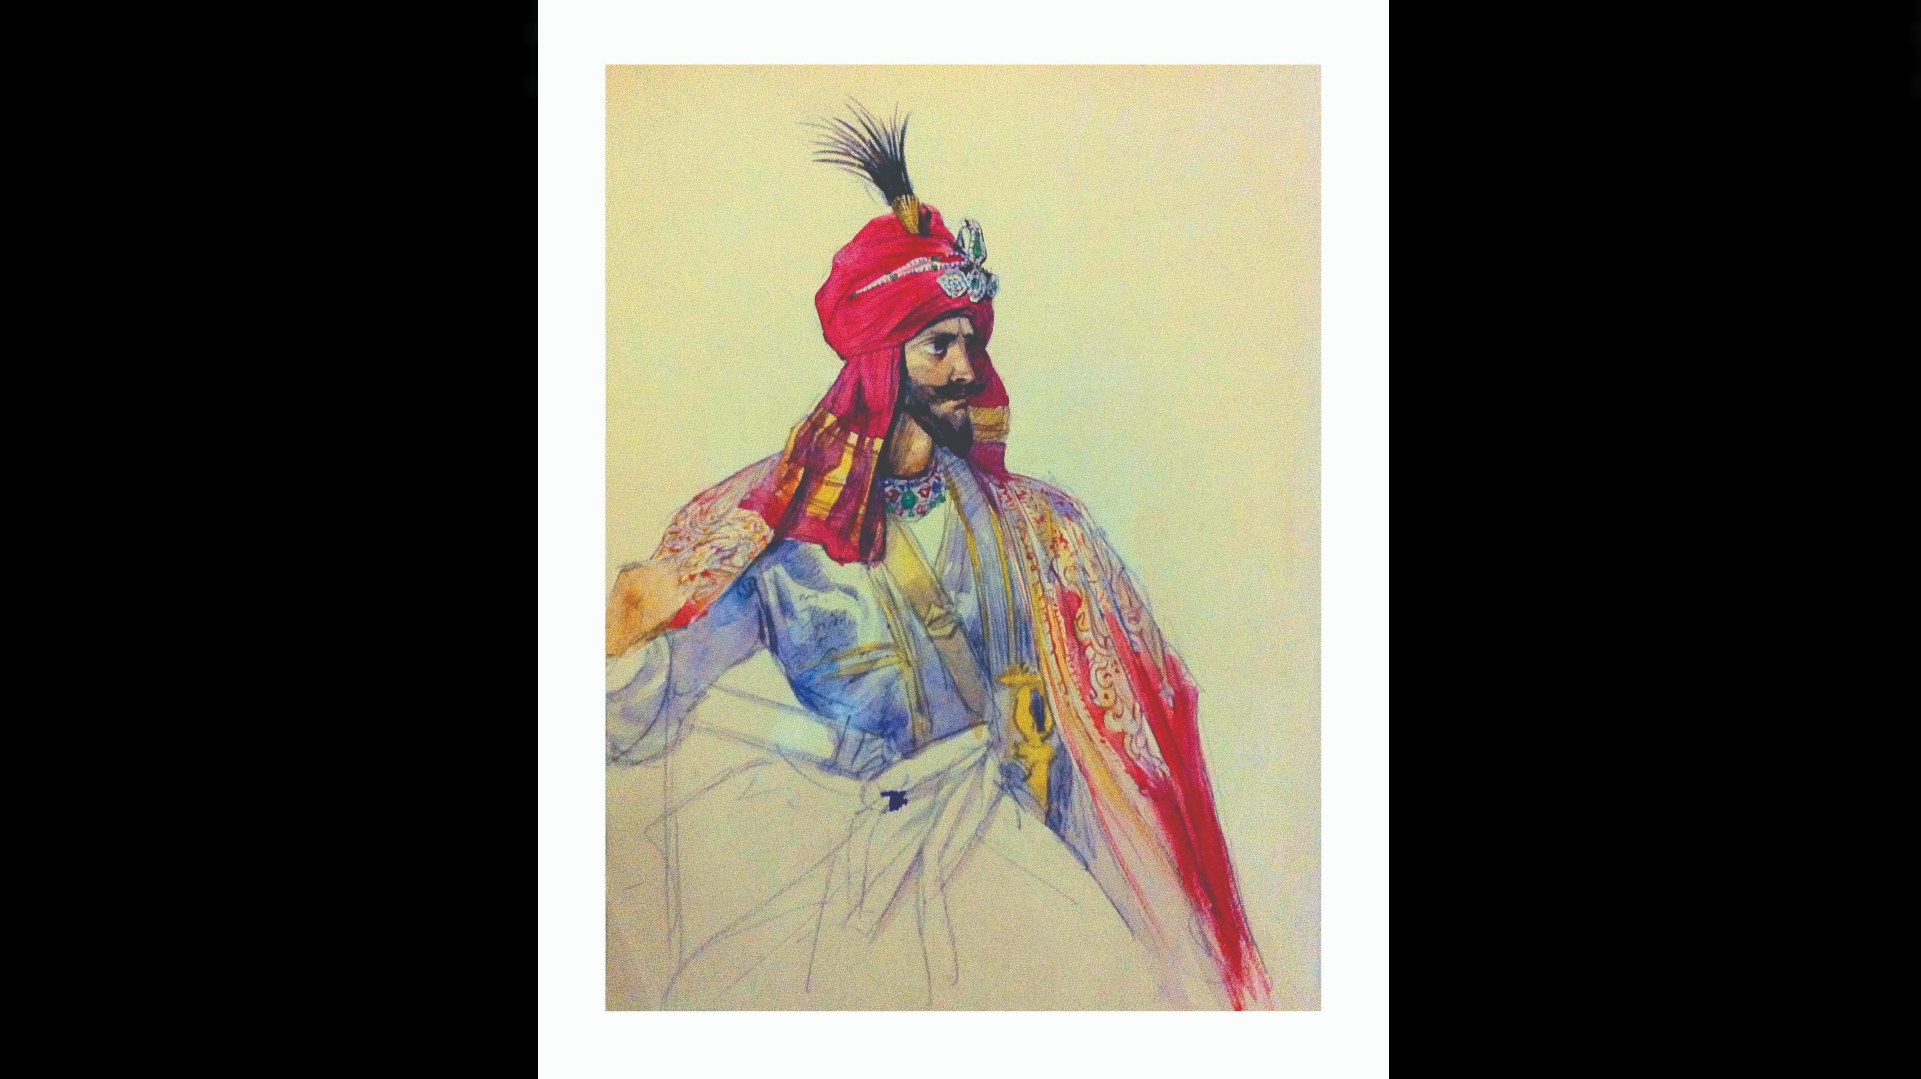 A portrait of a Sikh Noble by Prince Soltykoff